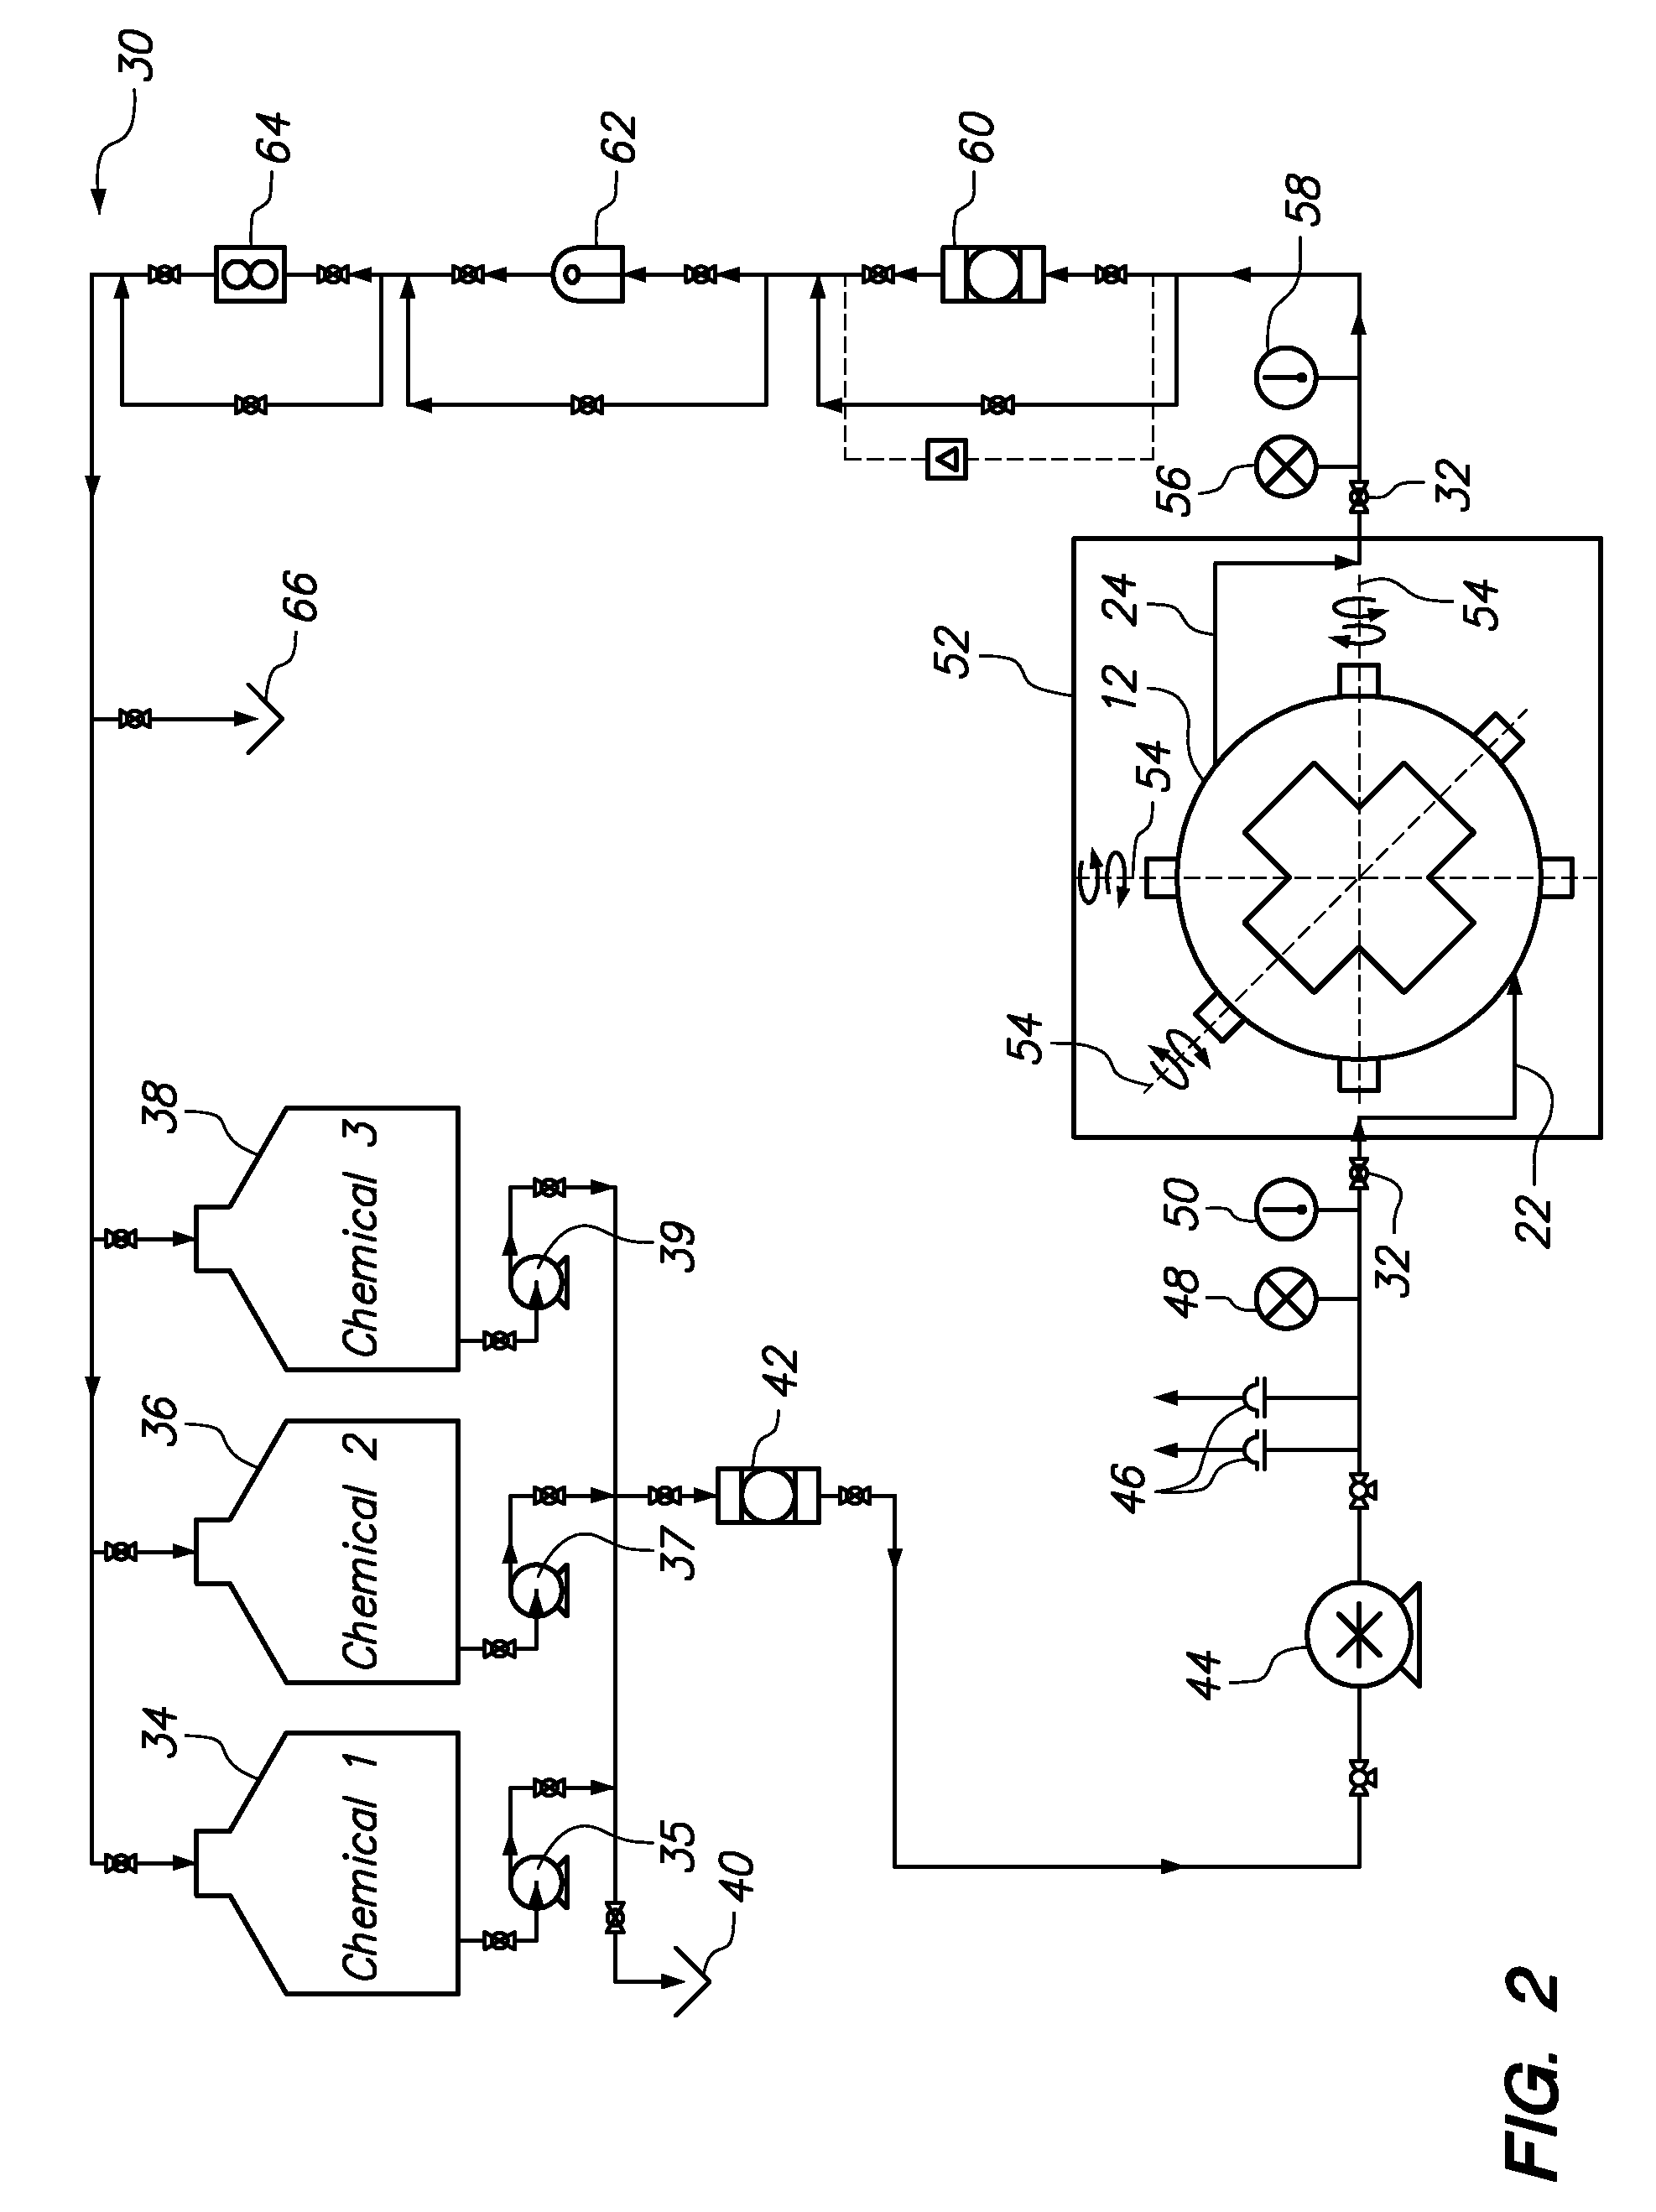 Method for cleaning an oil field capillary tube